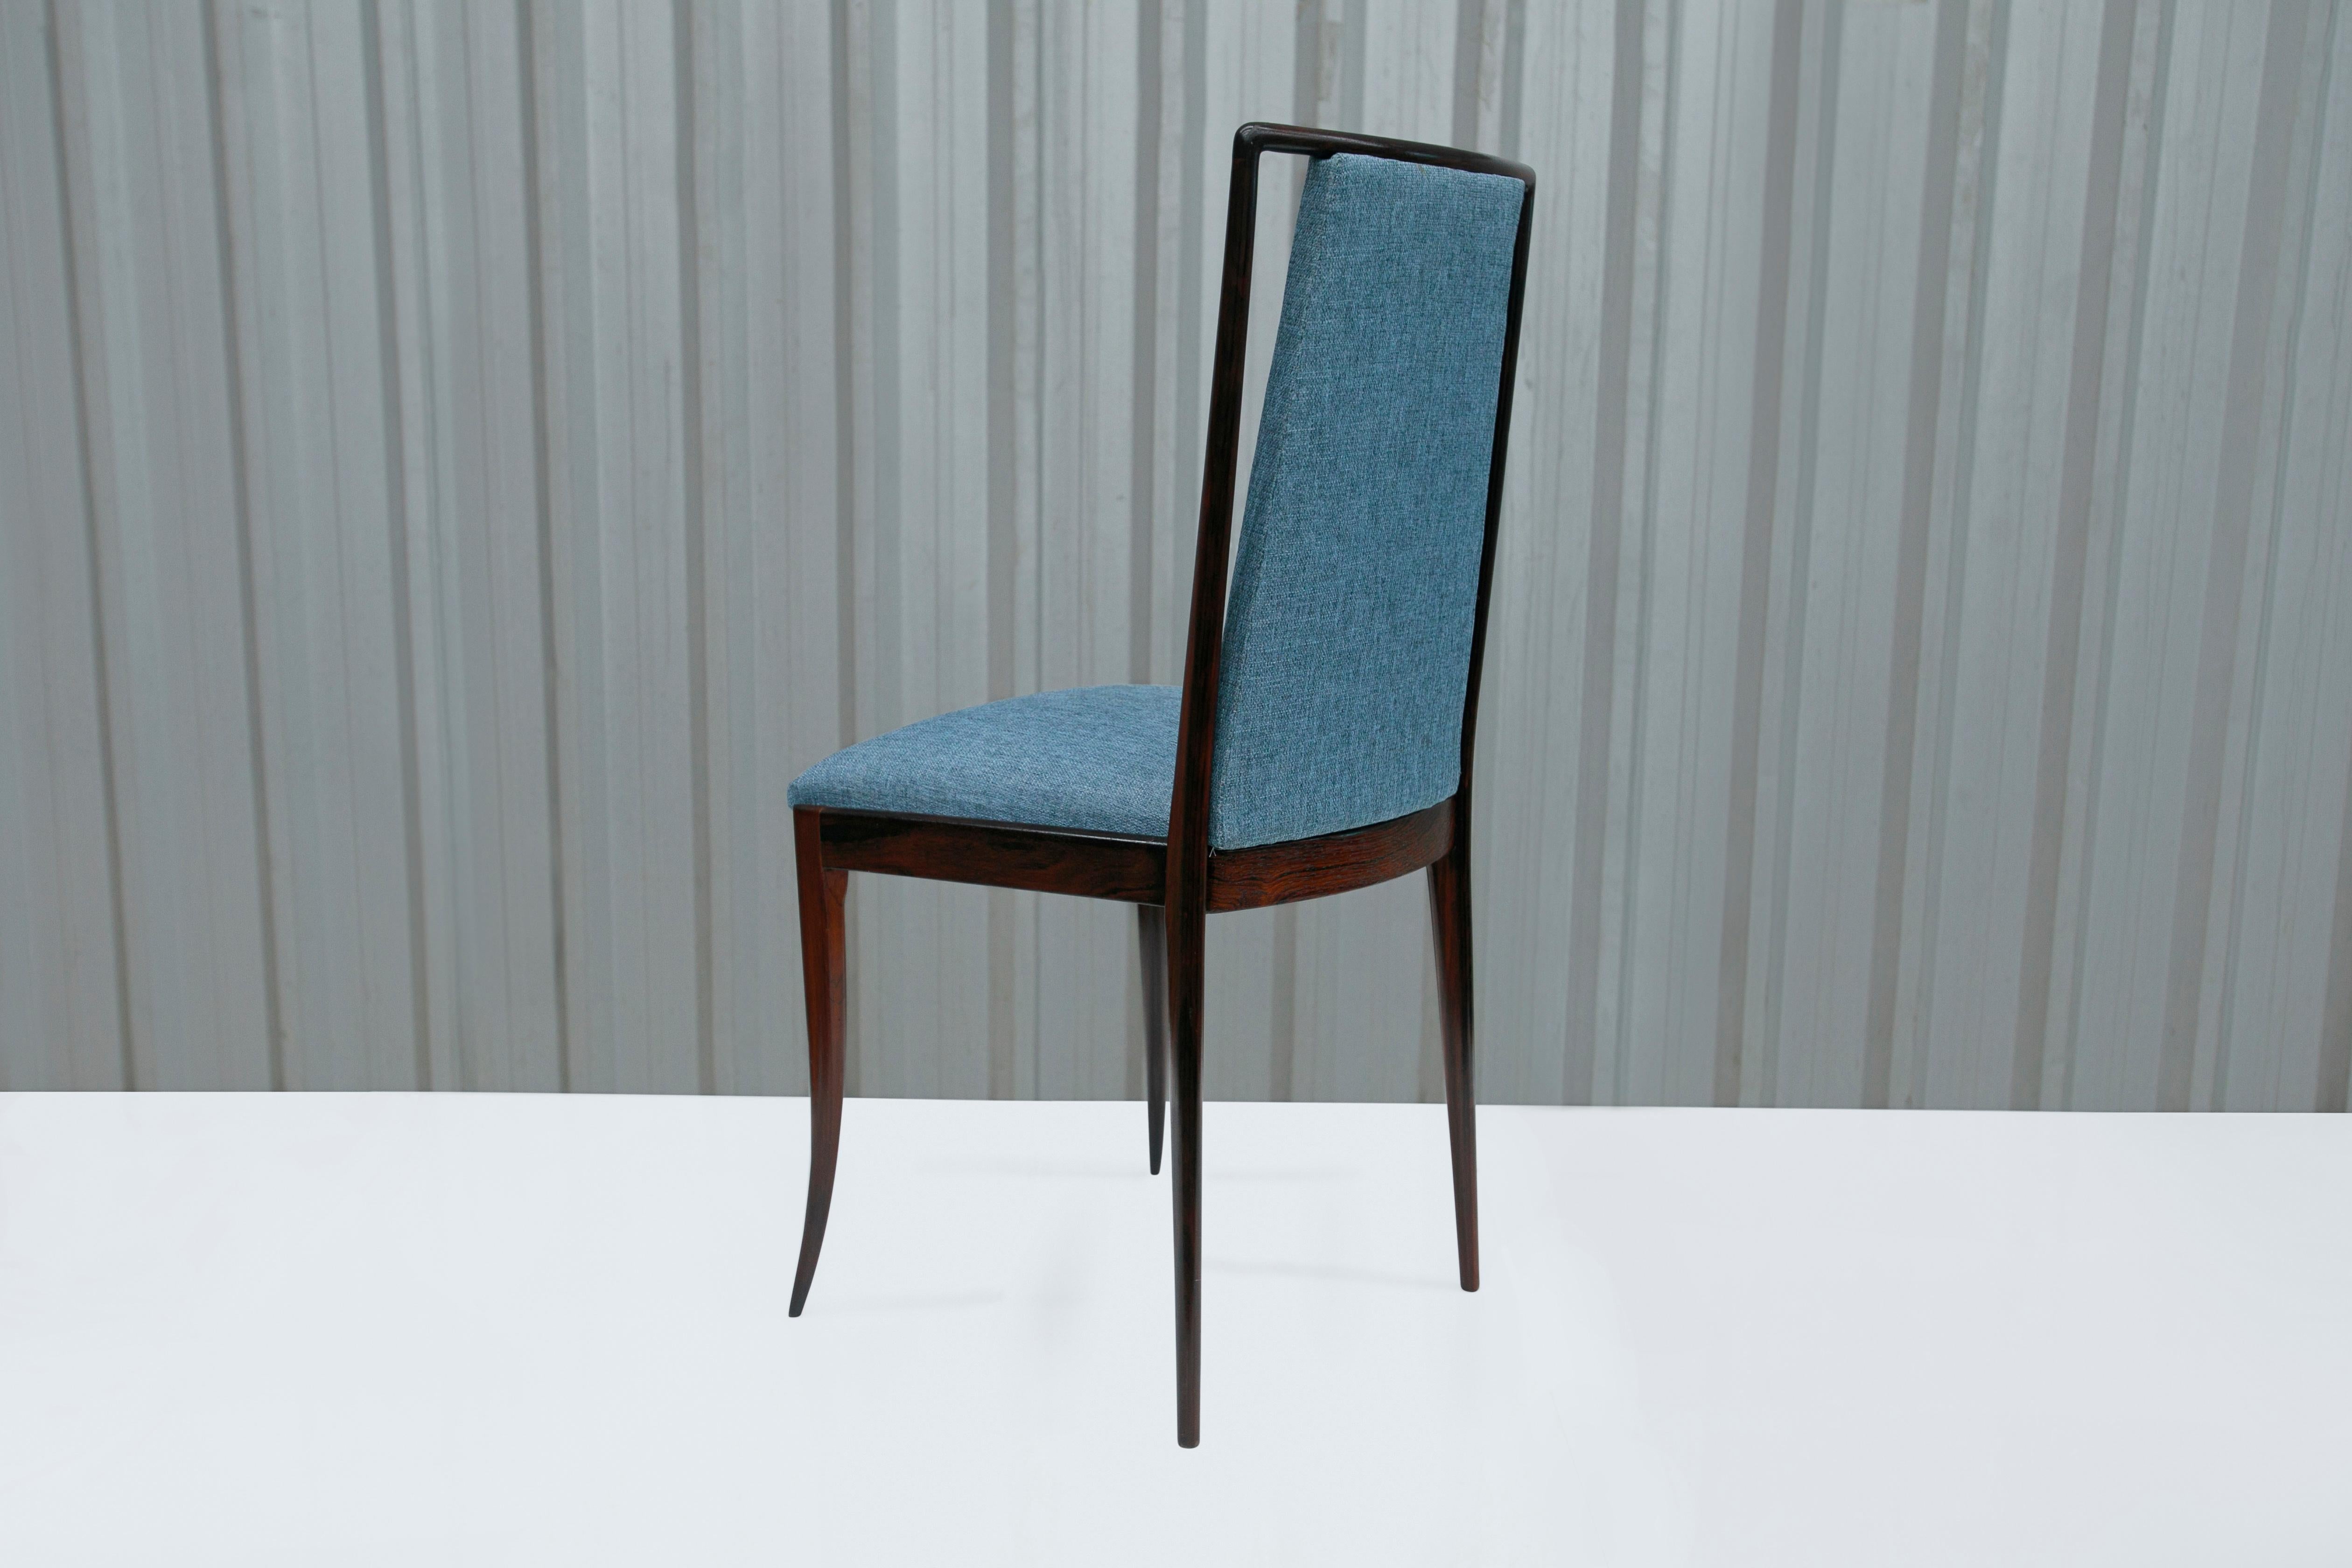 Brazilian Modern 4 Chair Set in Hardwood & Blue Fabric by G. Scapinelli, Brazi In Good Condition For Sale In New York, NY